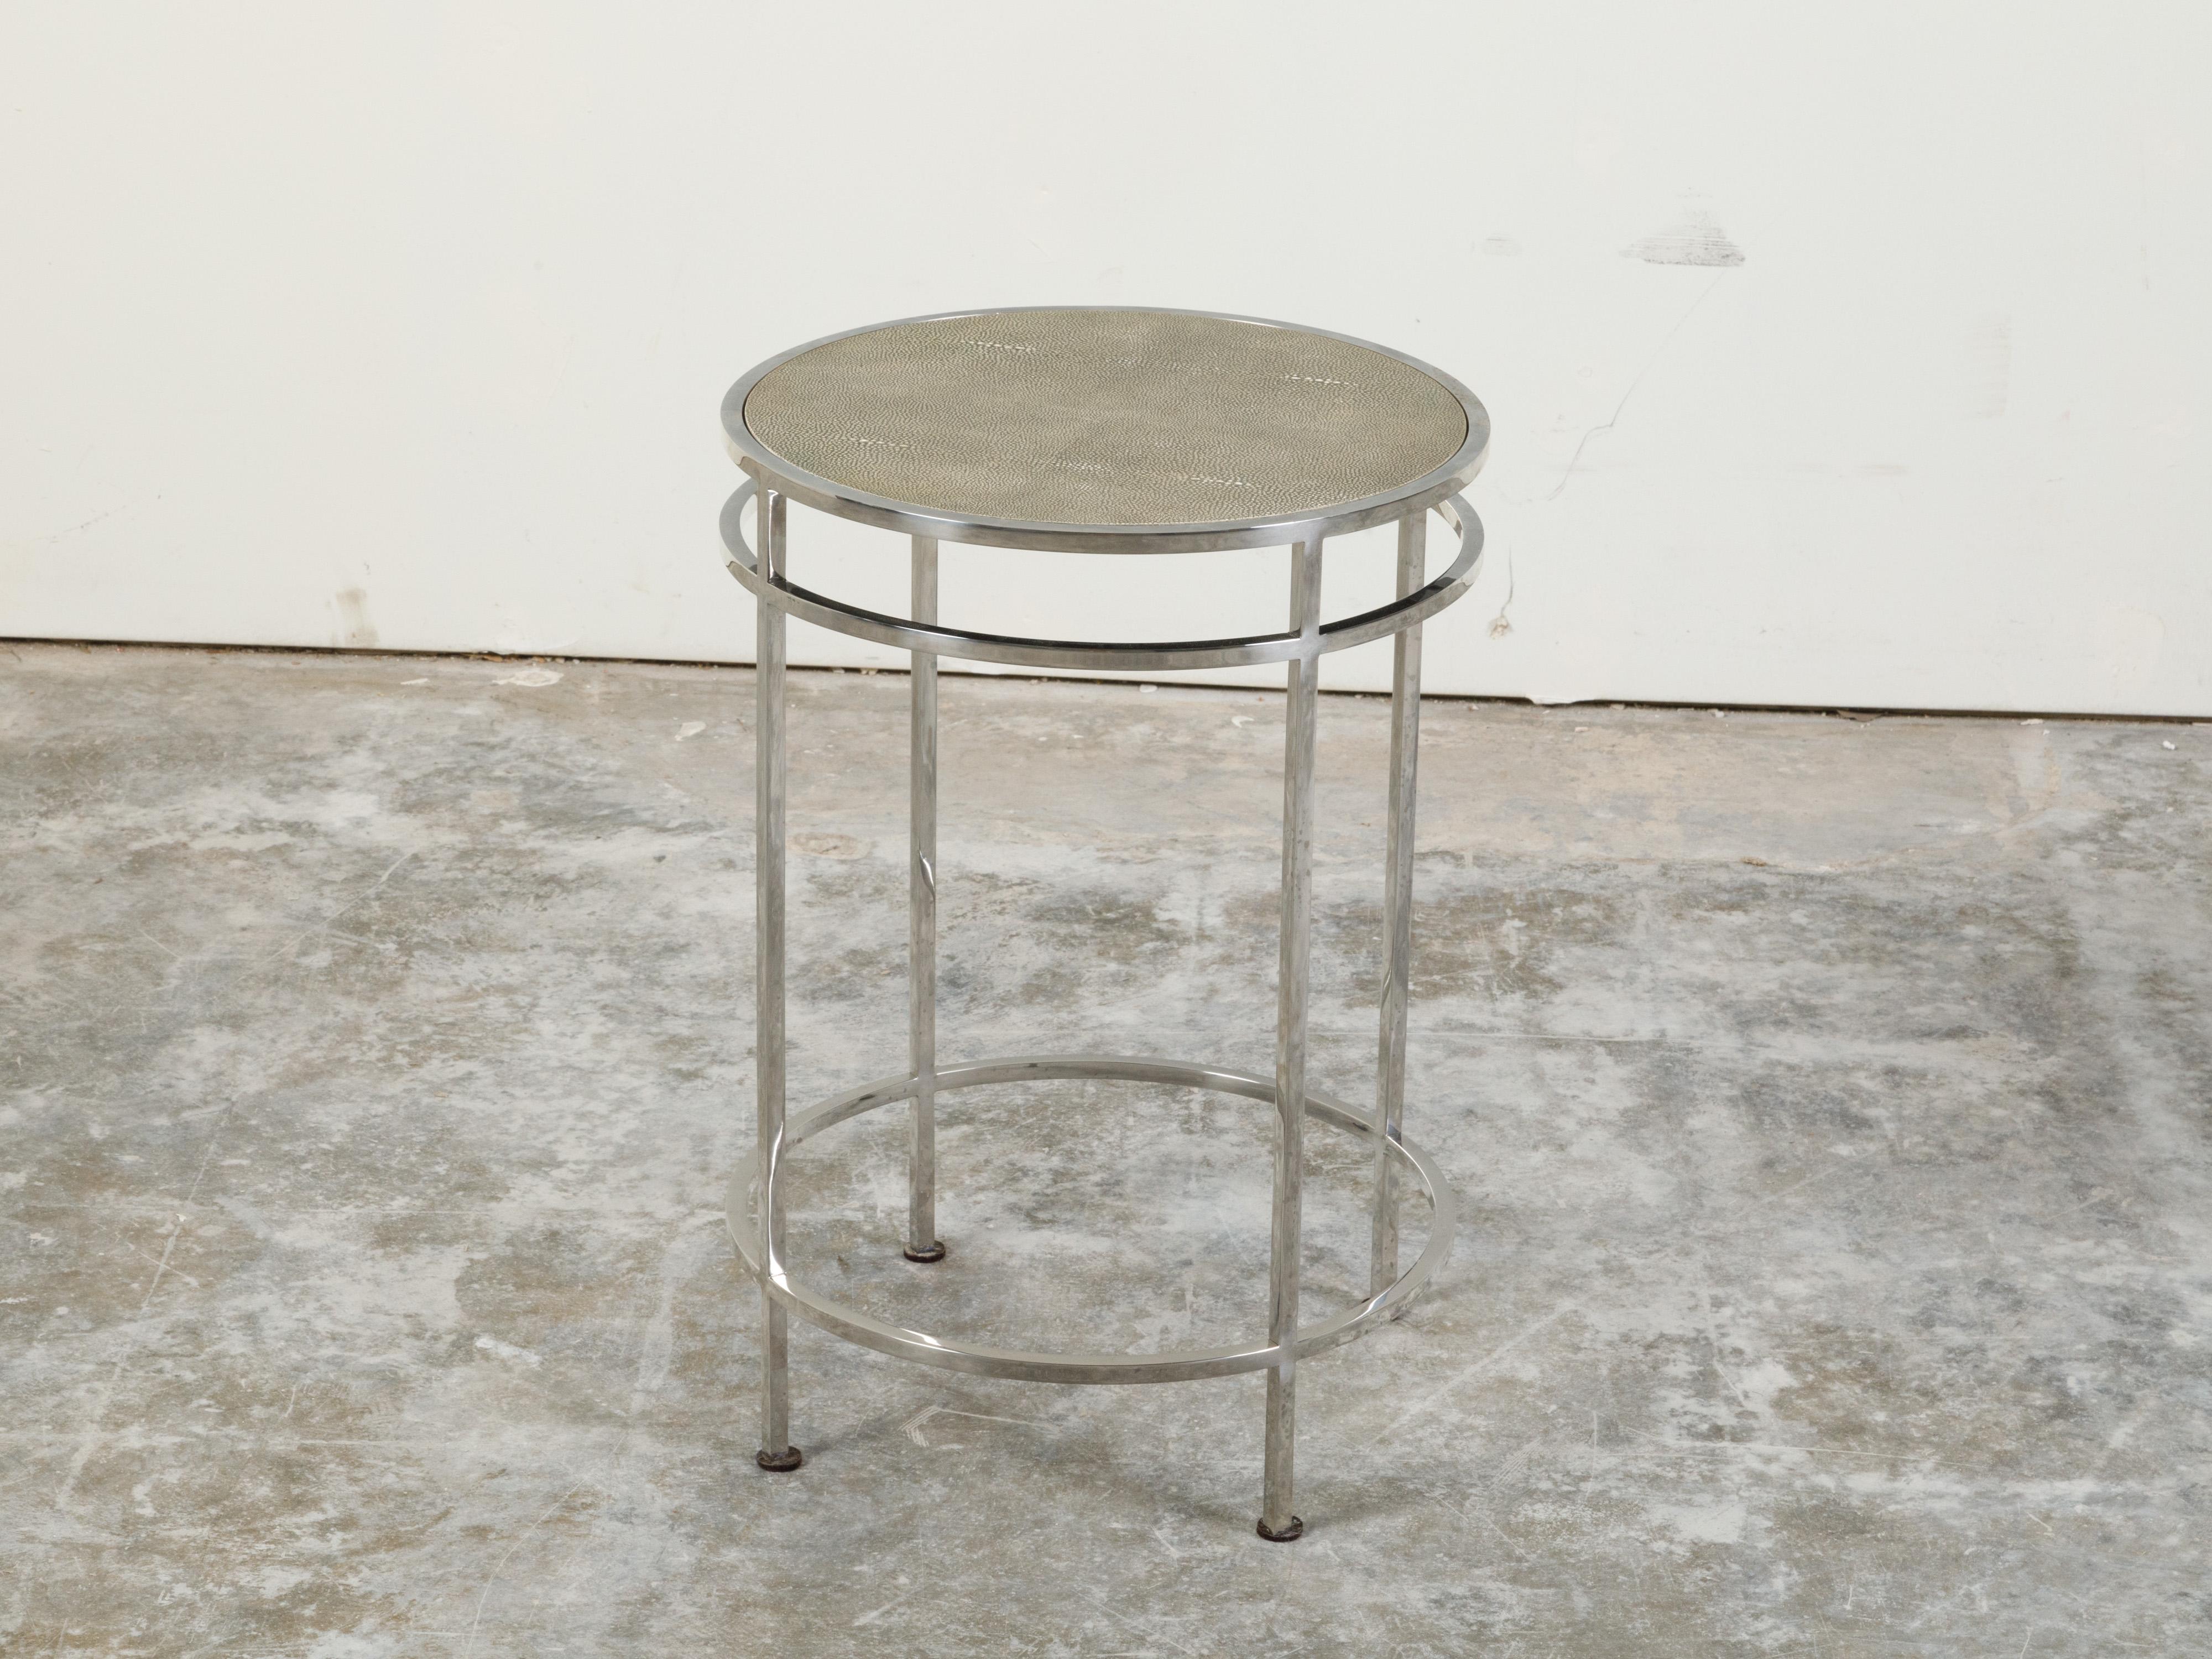 An Italian steel side table from the mid 20th century, with shagreen top and ring motifs. Created in Italy, this side table features a circular shagreen covered top sitting above four slender straight legs connected to one another through two round